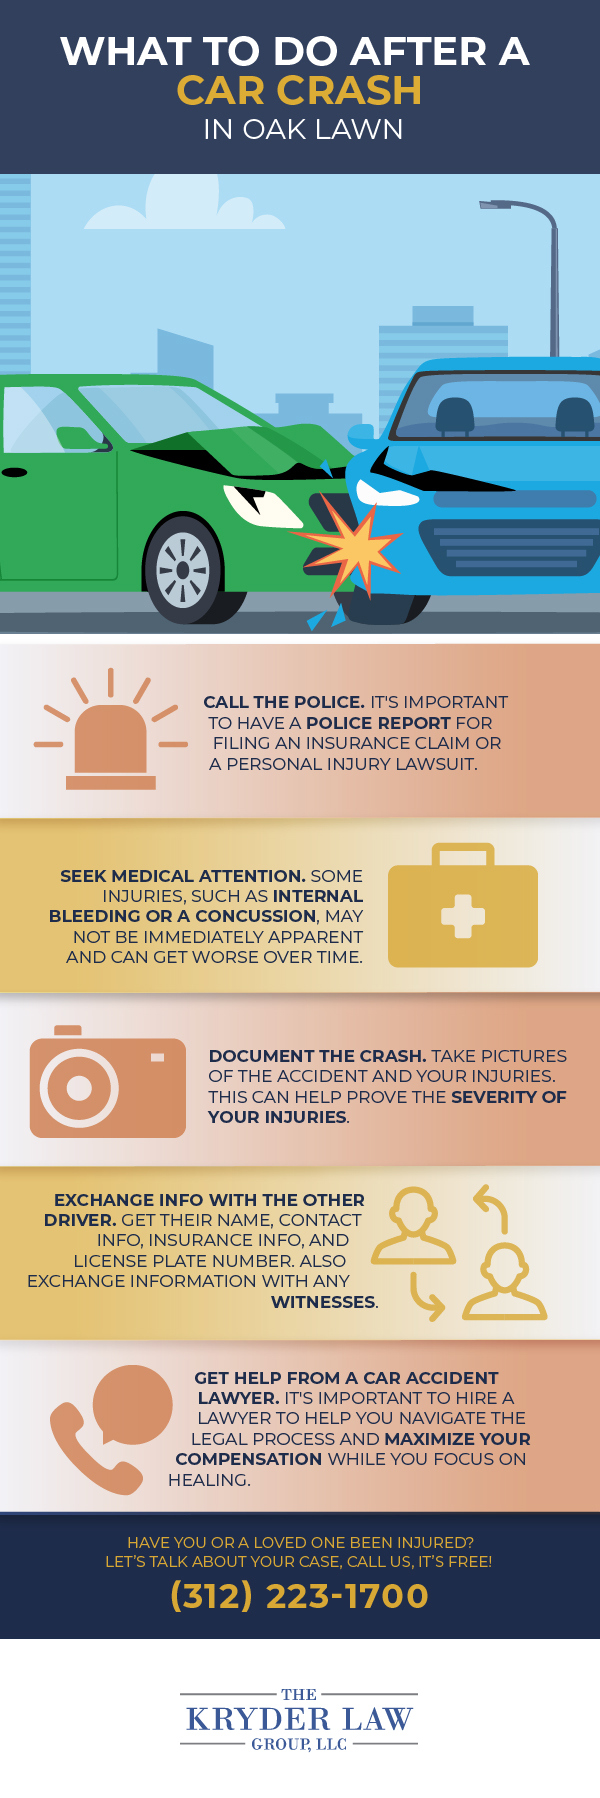 The Benefits of Hiring a Oak Lawn Car Accident Lawyer Infographic